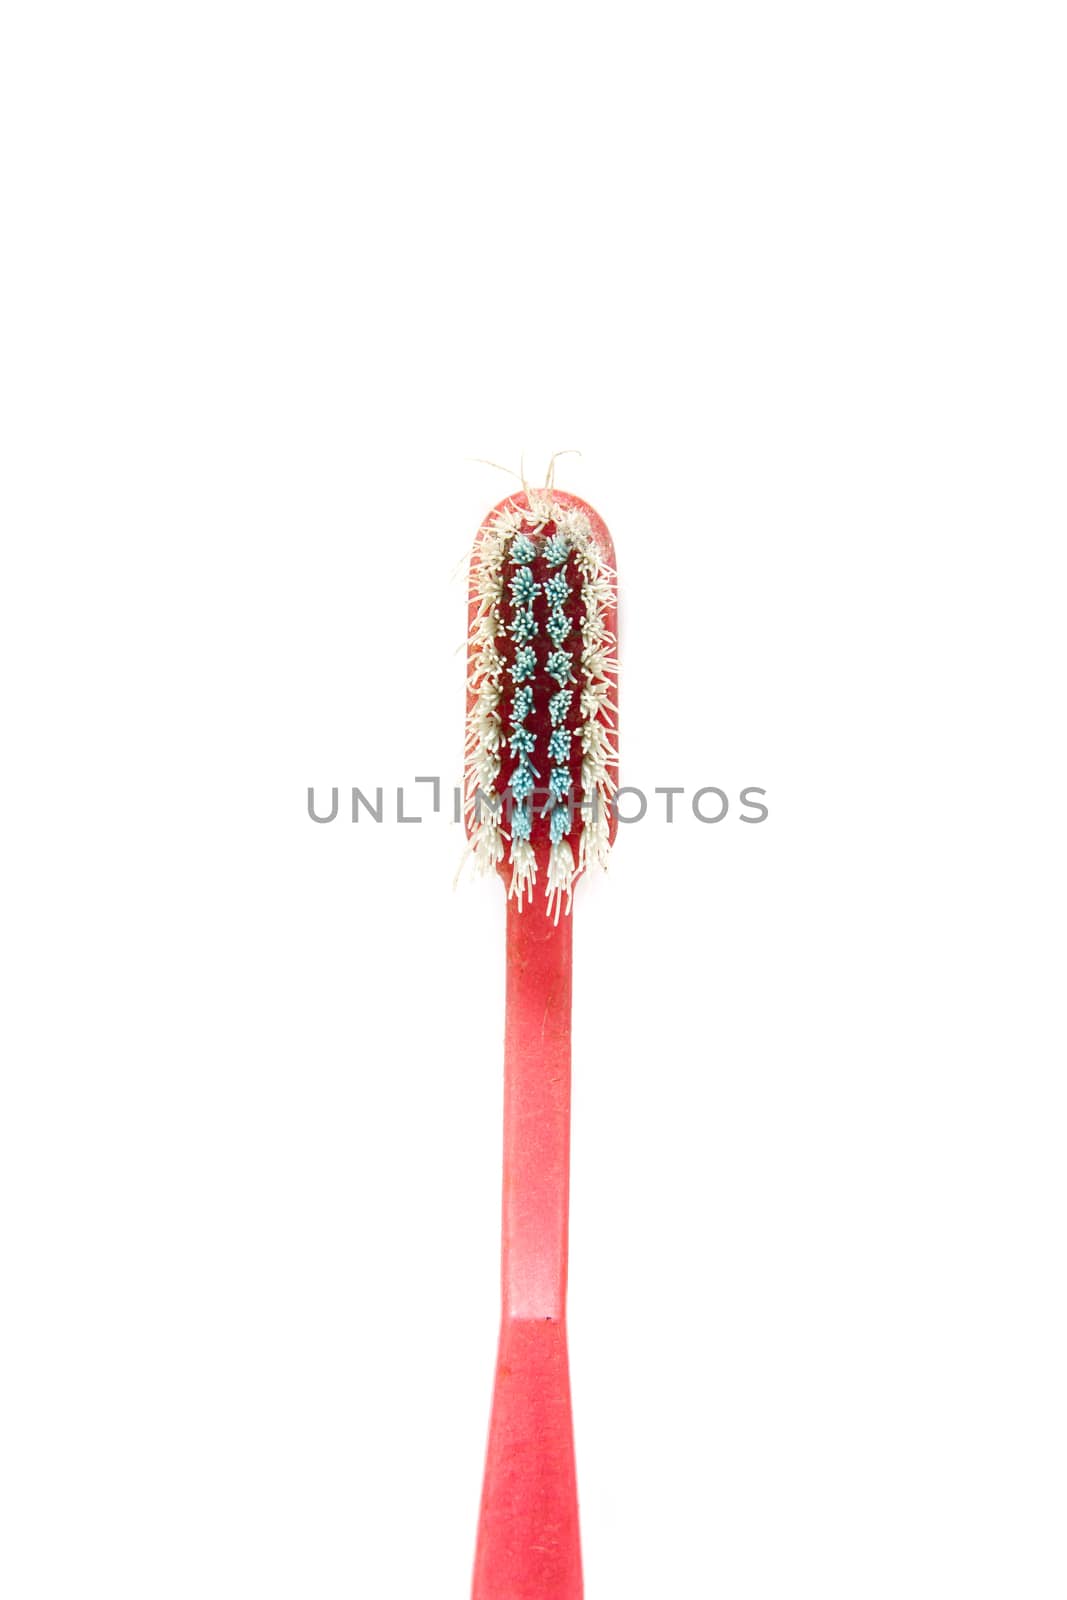 old toothbrush by kasinv